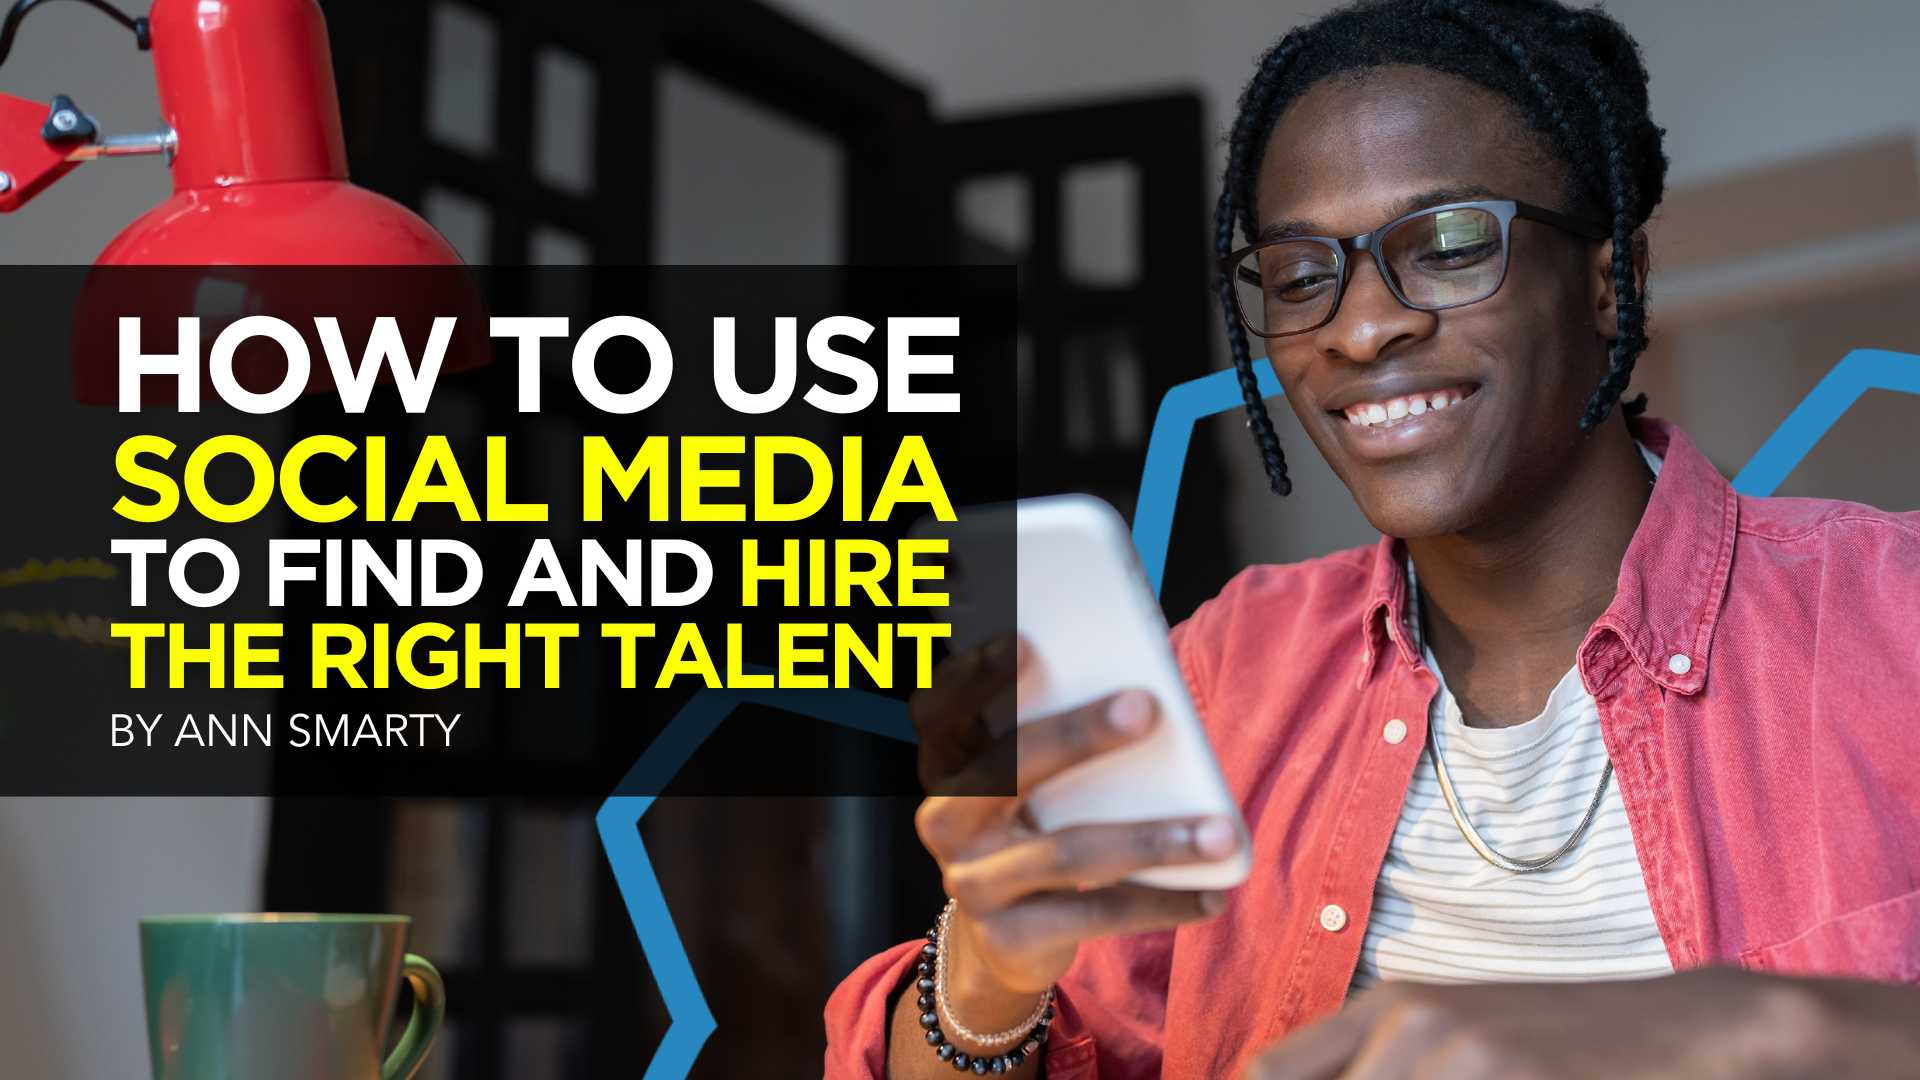 How to Use Social Media to Find and Hire the Right Talent